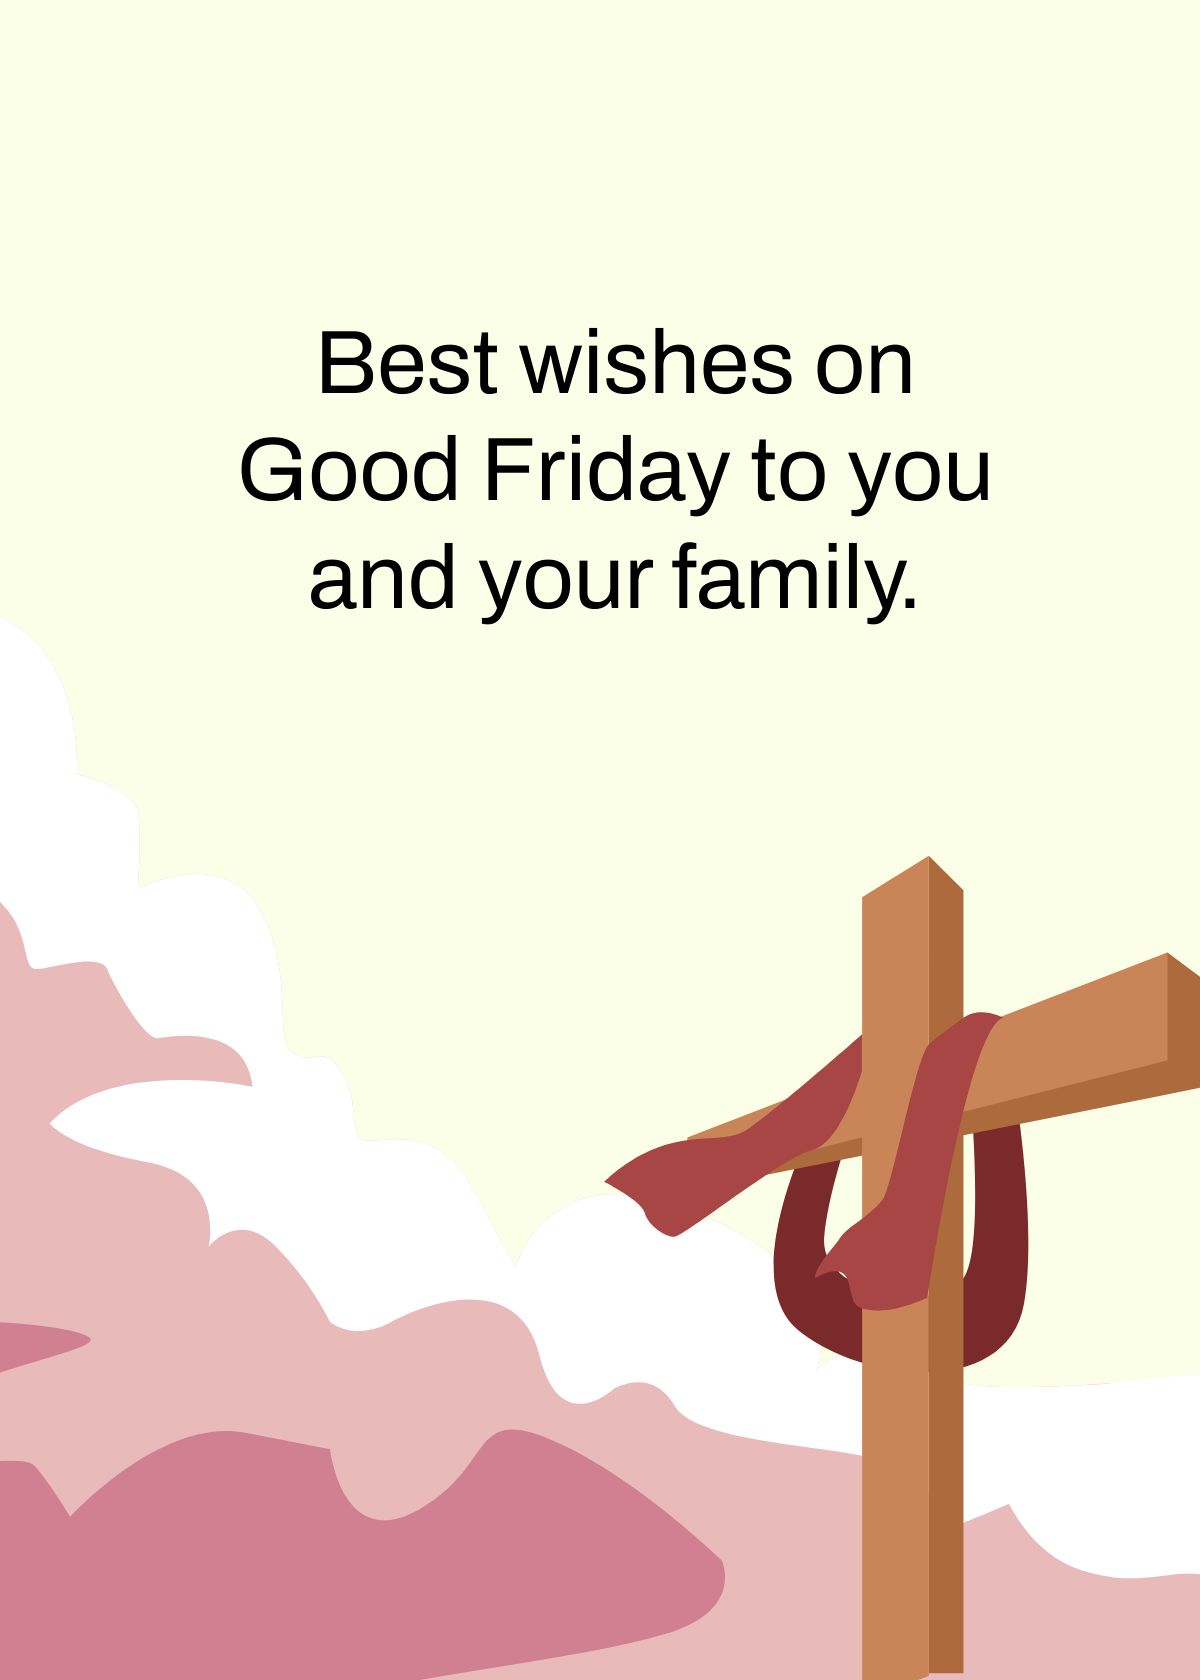 Free Good Friday Best Wishes in Word, Google Docs, Illustrator, PSD, EPS, SVG, JPG, PNG